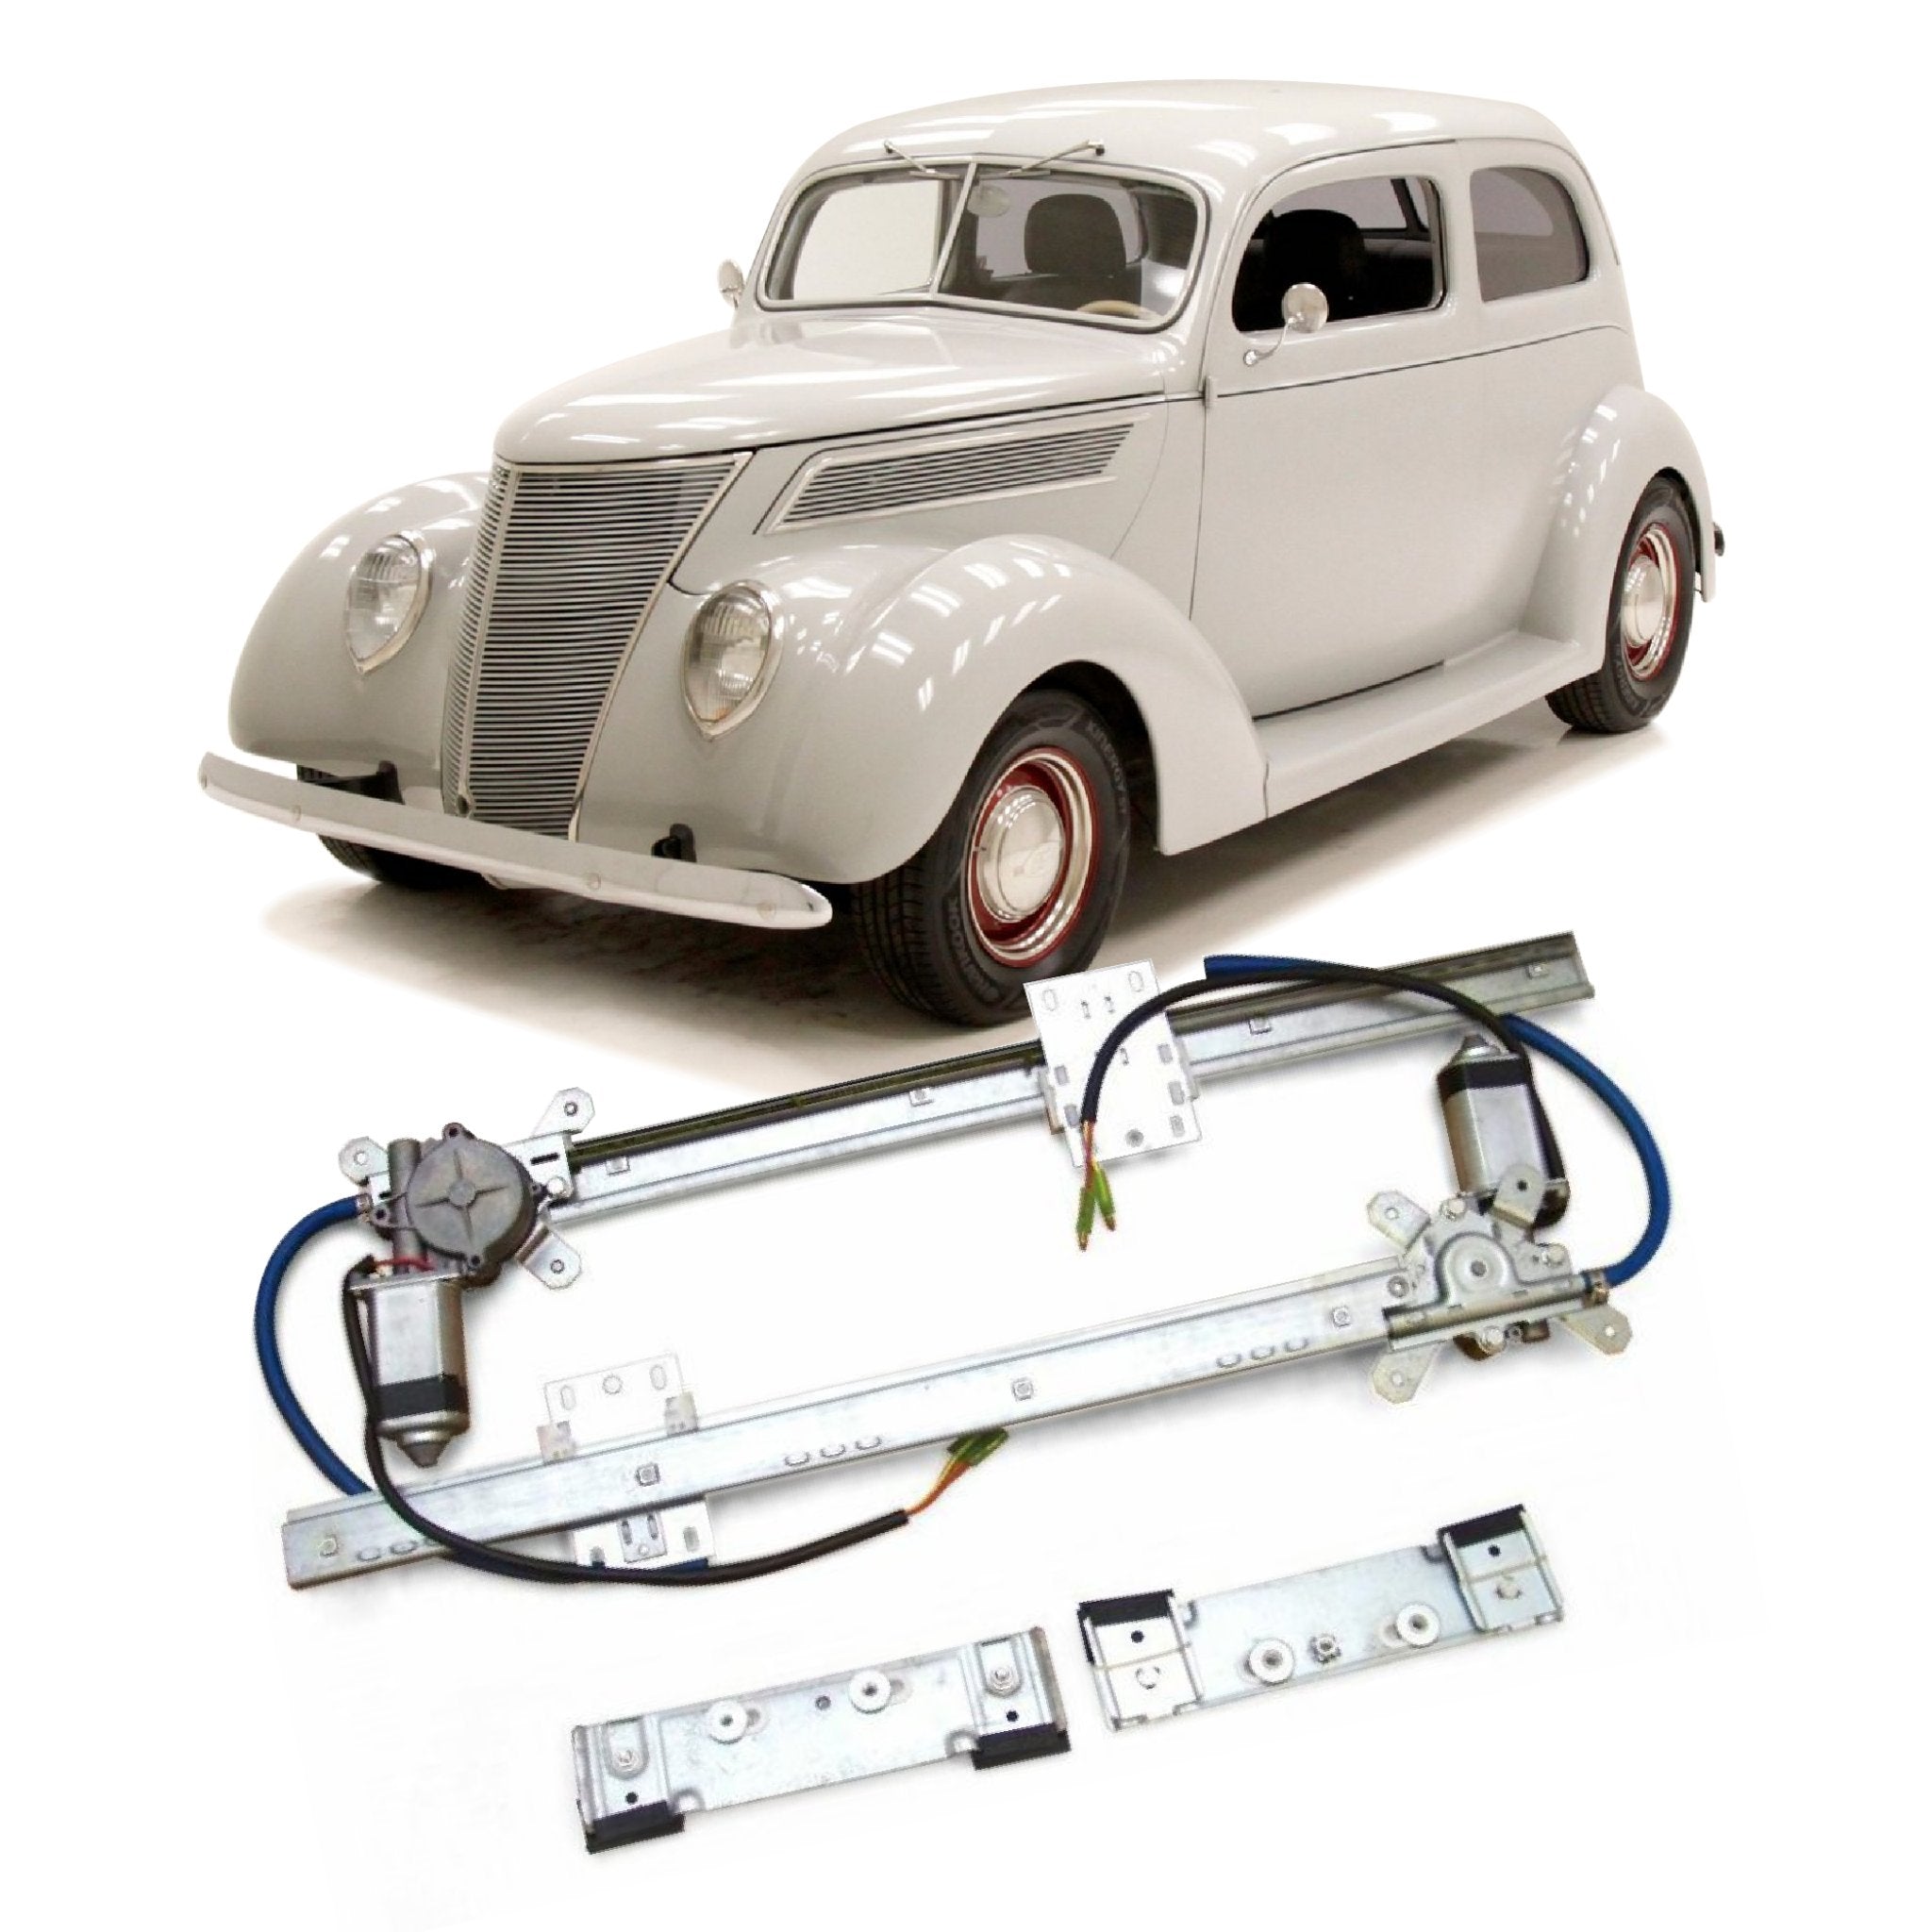 2 Door Power Window Conversion Kit for 1937 Ford Delivery Slantback Humpback